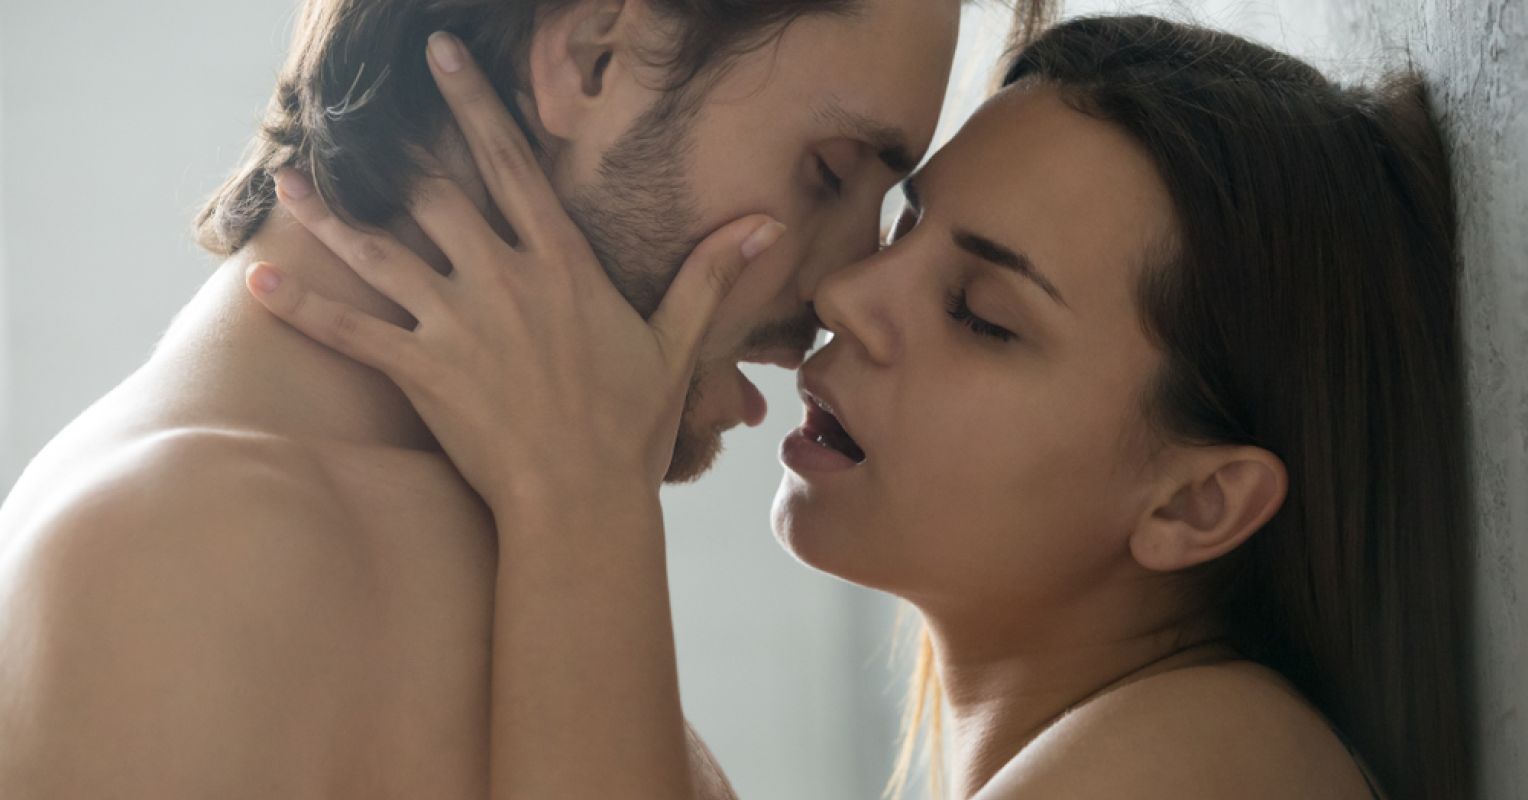 Why We Scream and Moan During Sex Psychology Today